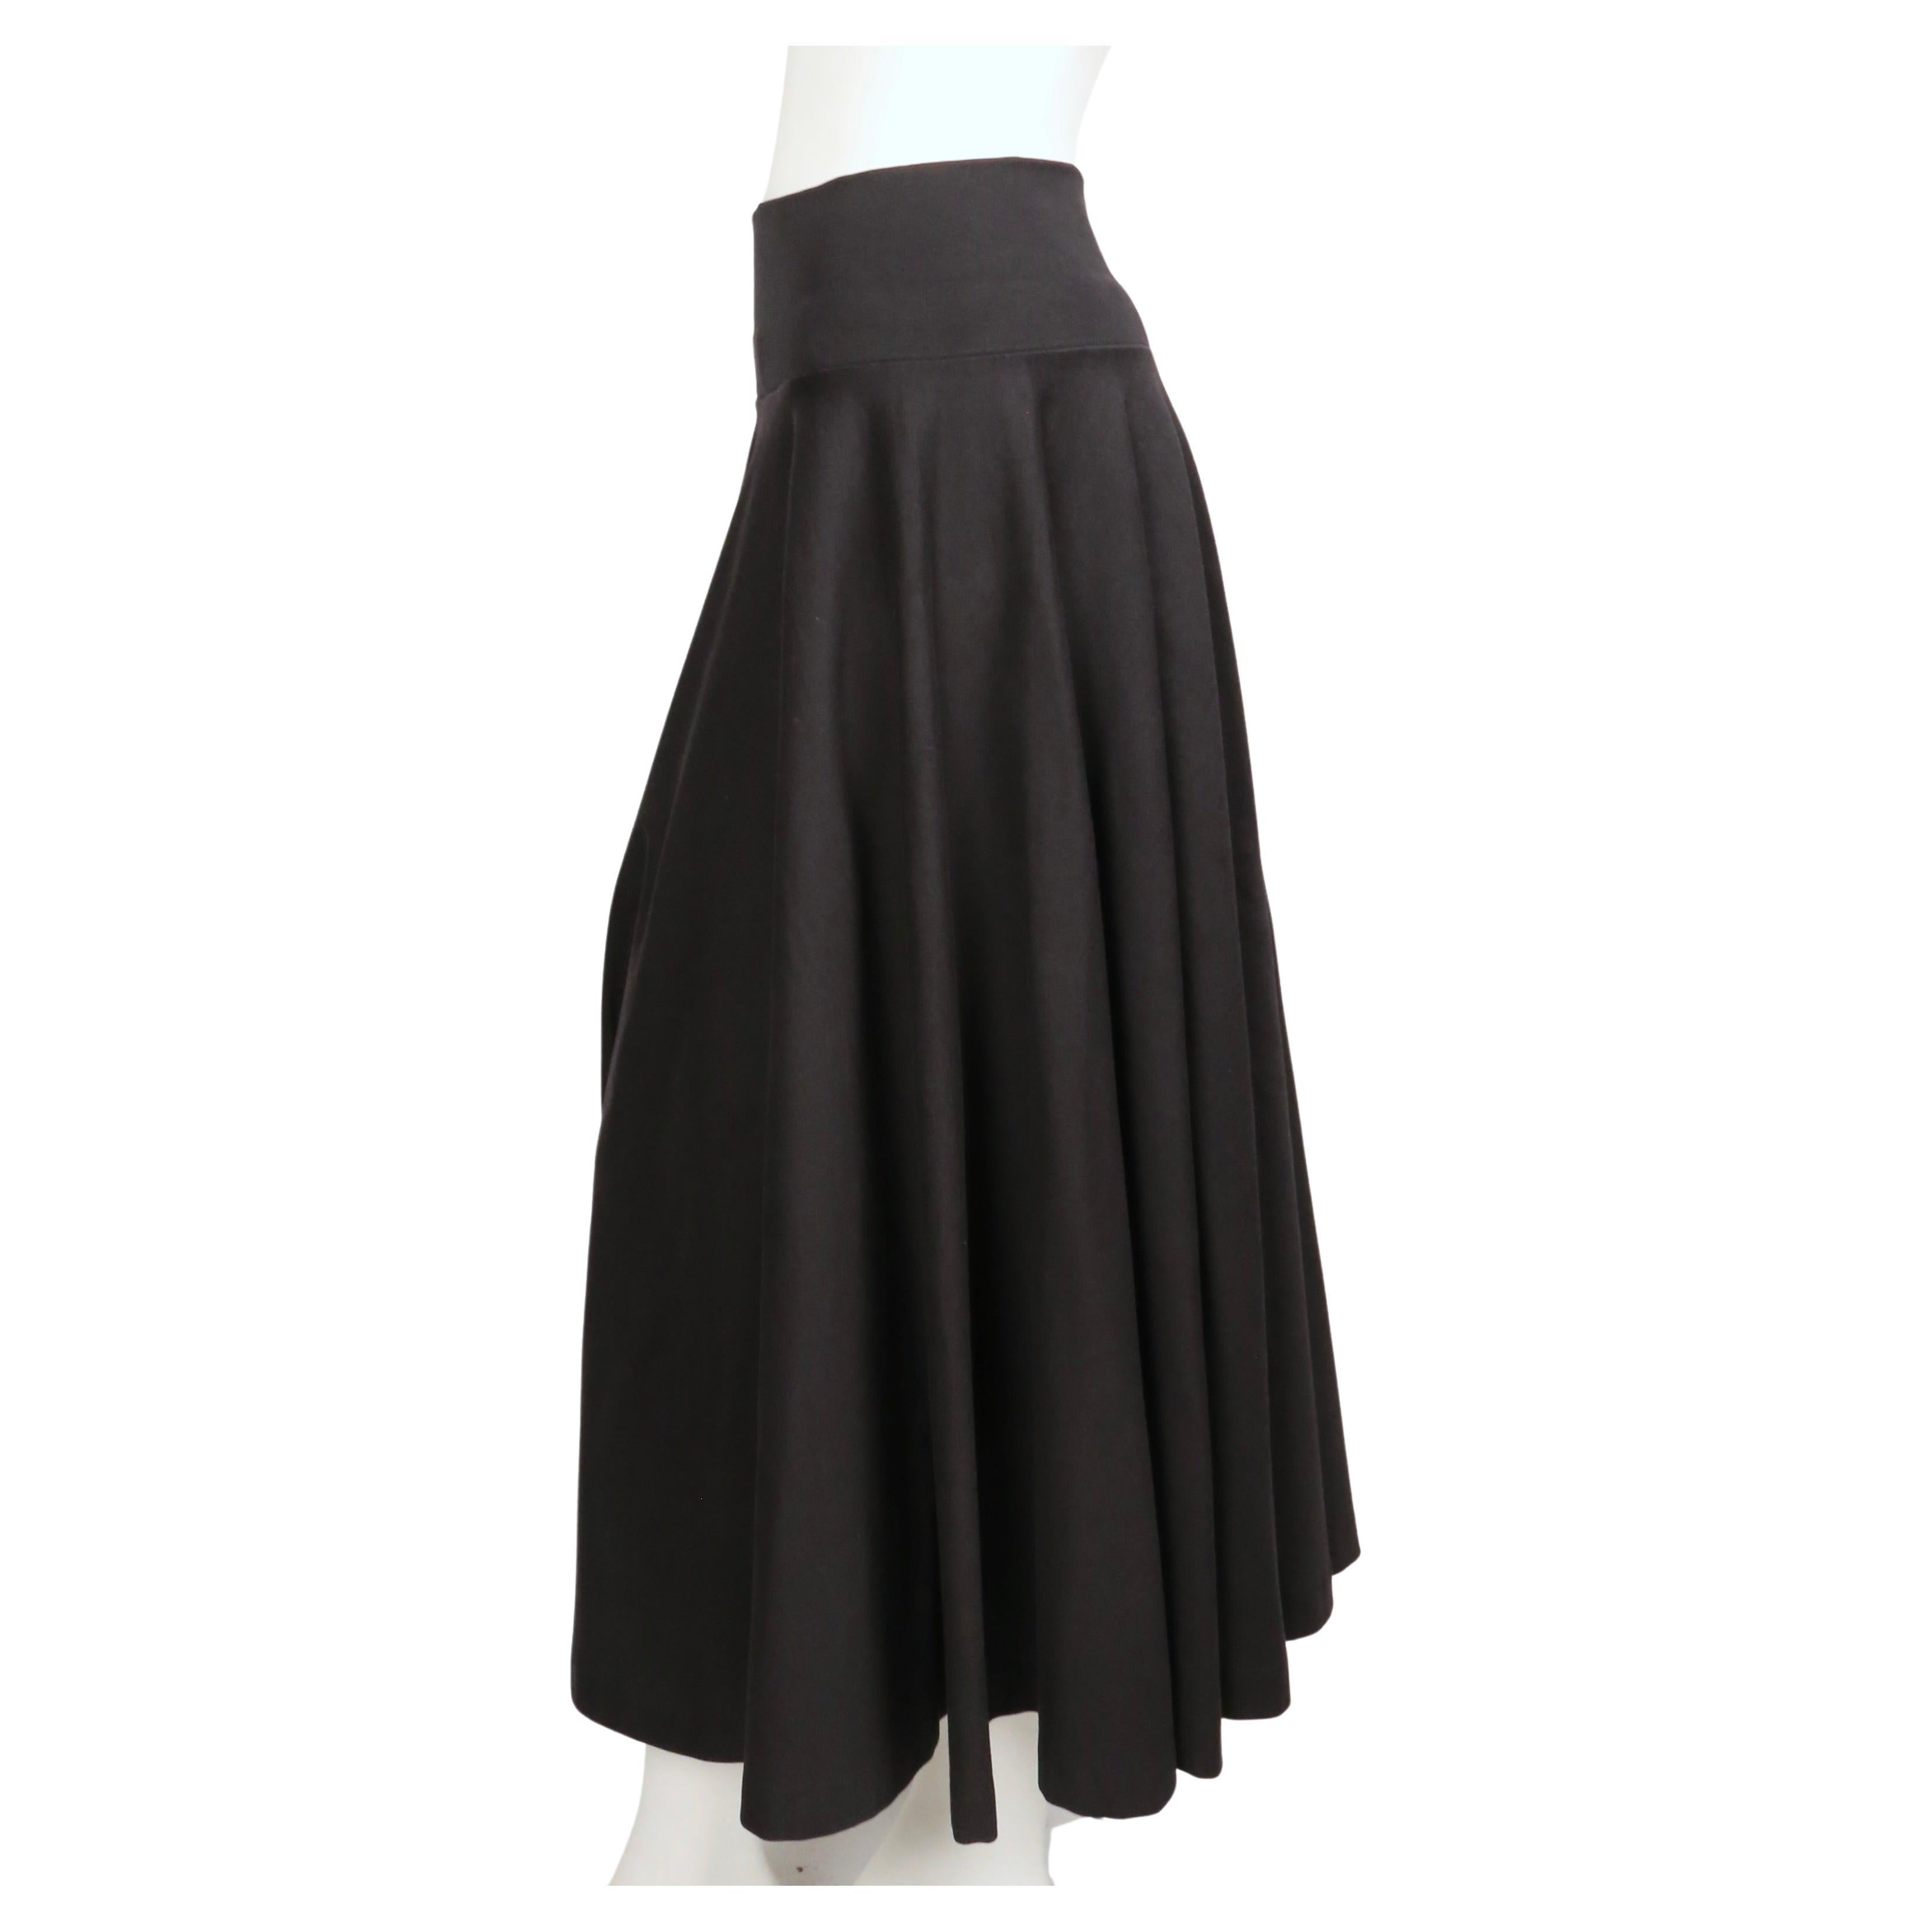 2000's JIL SANDER black cotton twill circle skirt In Good Condition For Sale In San Fransisco, CA